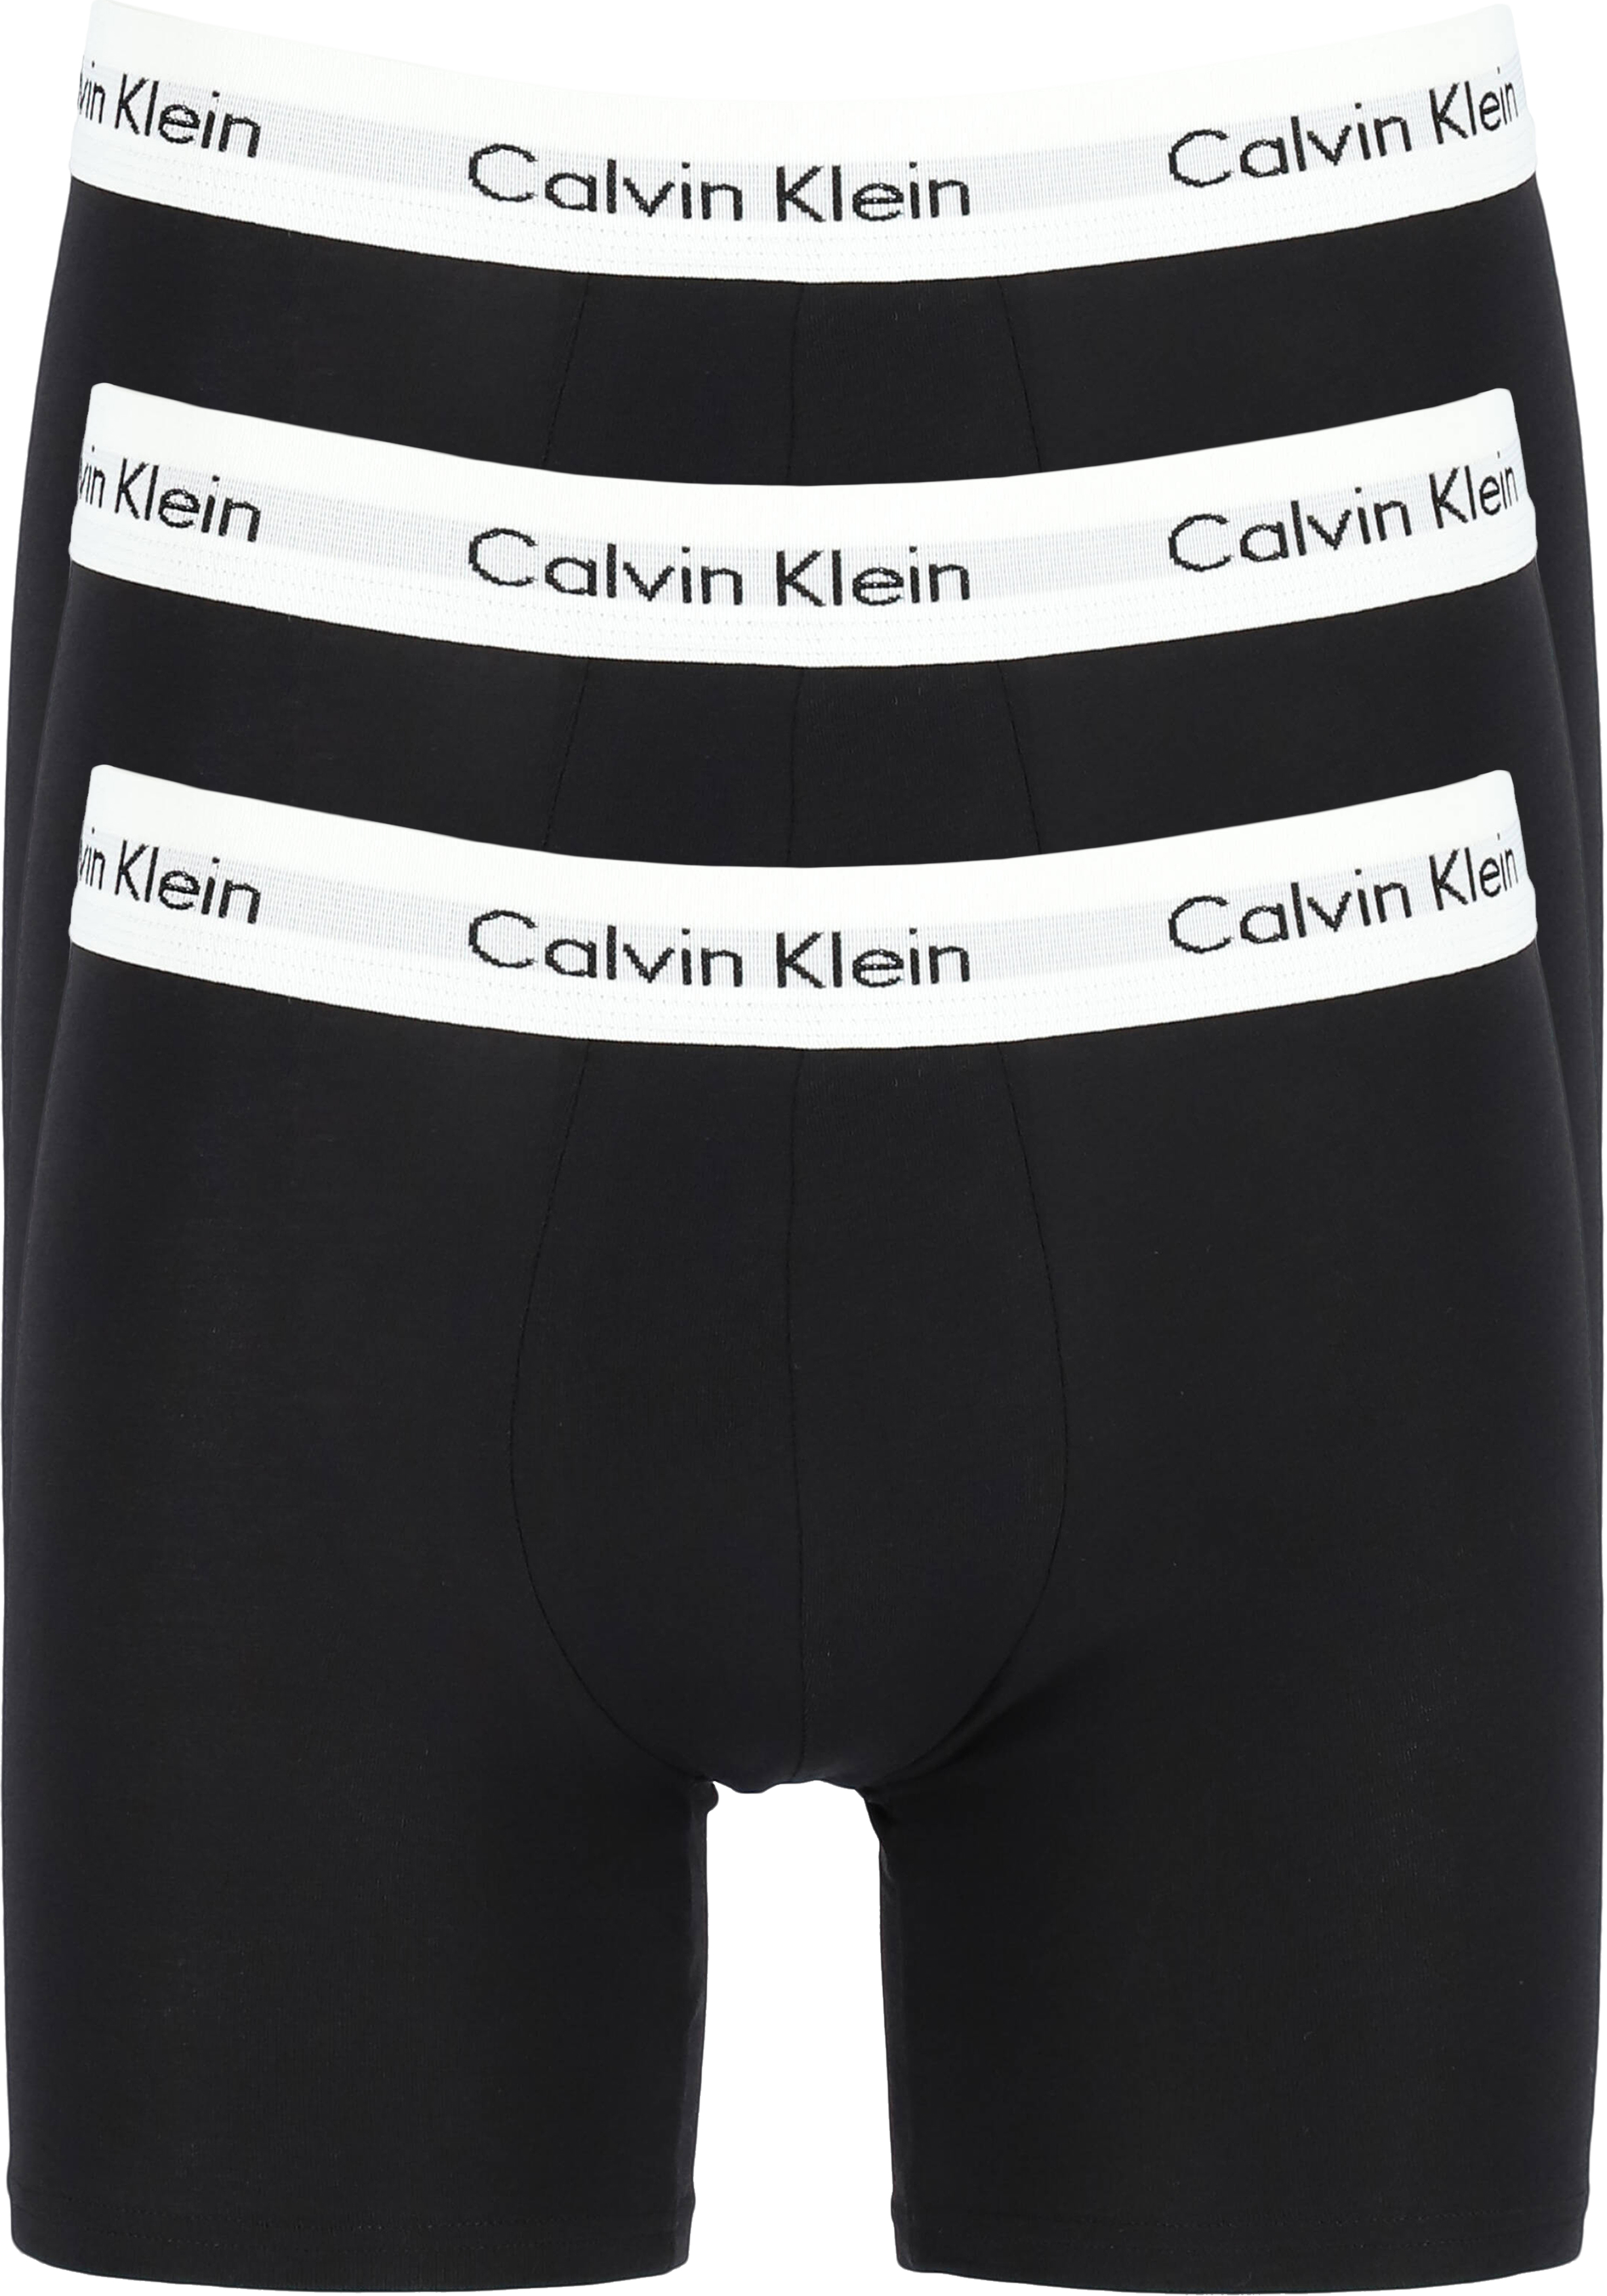 Klein Cotton Stretch boxer brief (3-pack), boxers extra... - Zomer SALE tot 50% korting